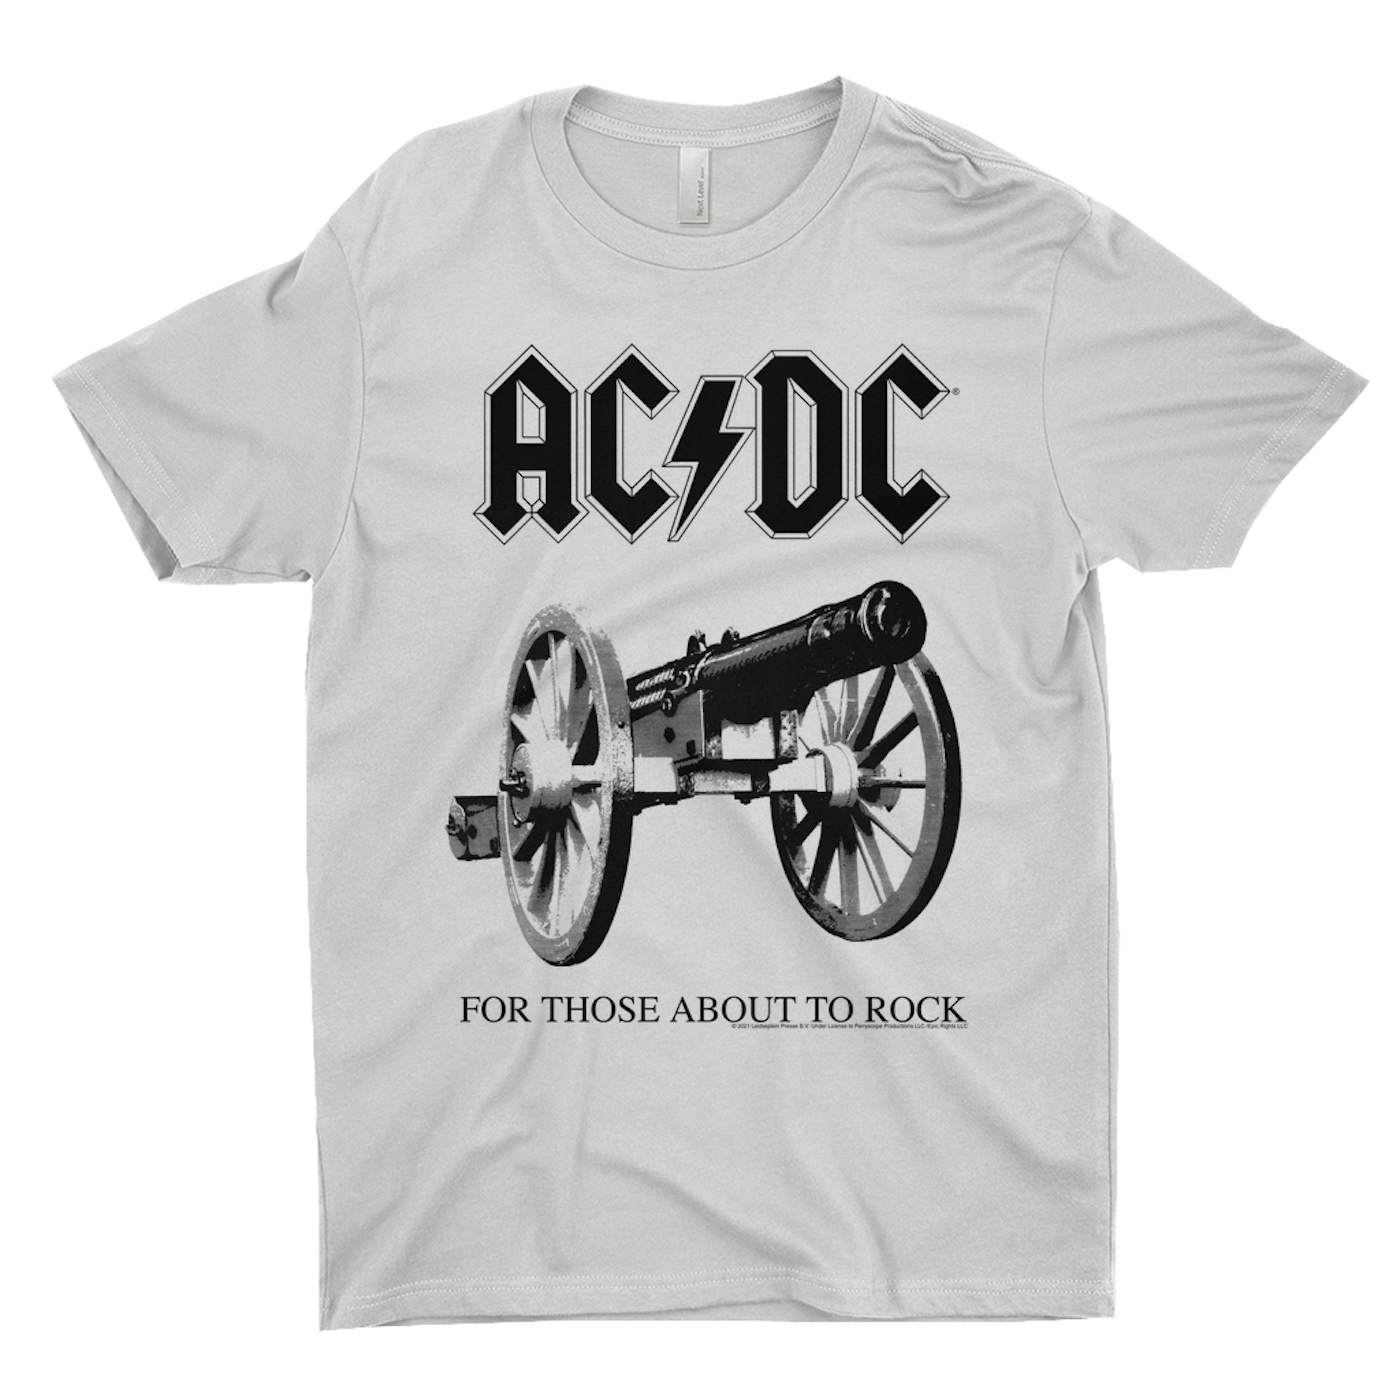 AC/DC Image | T-Shirt Black Cannon For Shirt Rock About To Those